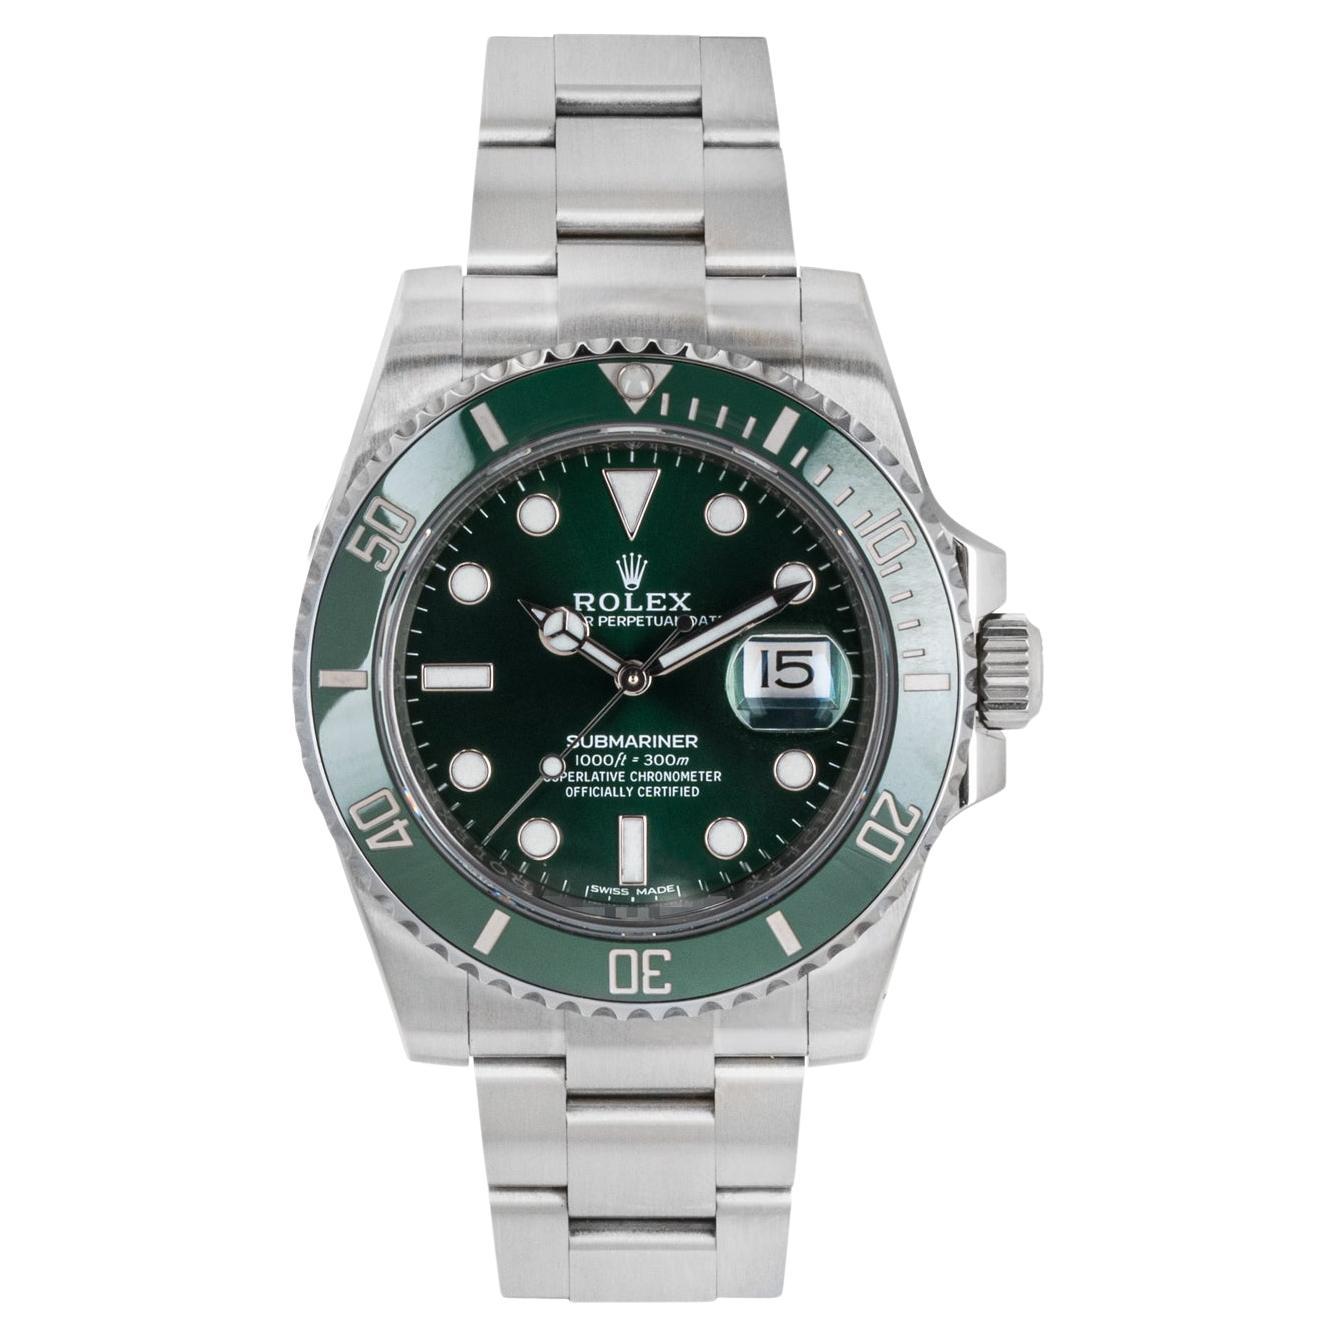 A 40mm Submariner Date Hulk in Oystersteel by Rolex. Featuring a green dial with a date aperture and a green unidirectional rotatable ceramic bezel set with 60-minute graduations. The Oyster bracelet comes equipped with a folding Oysterlock clasp.